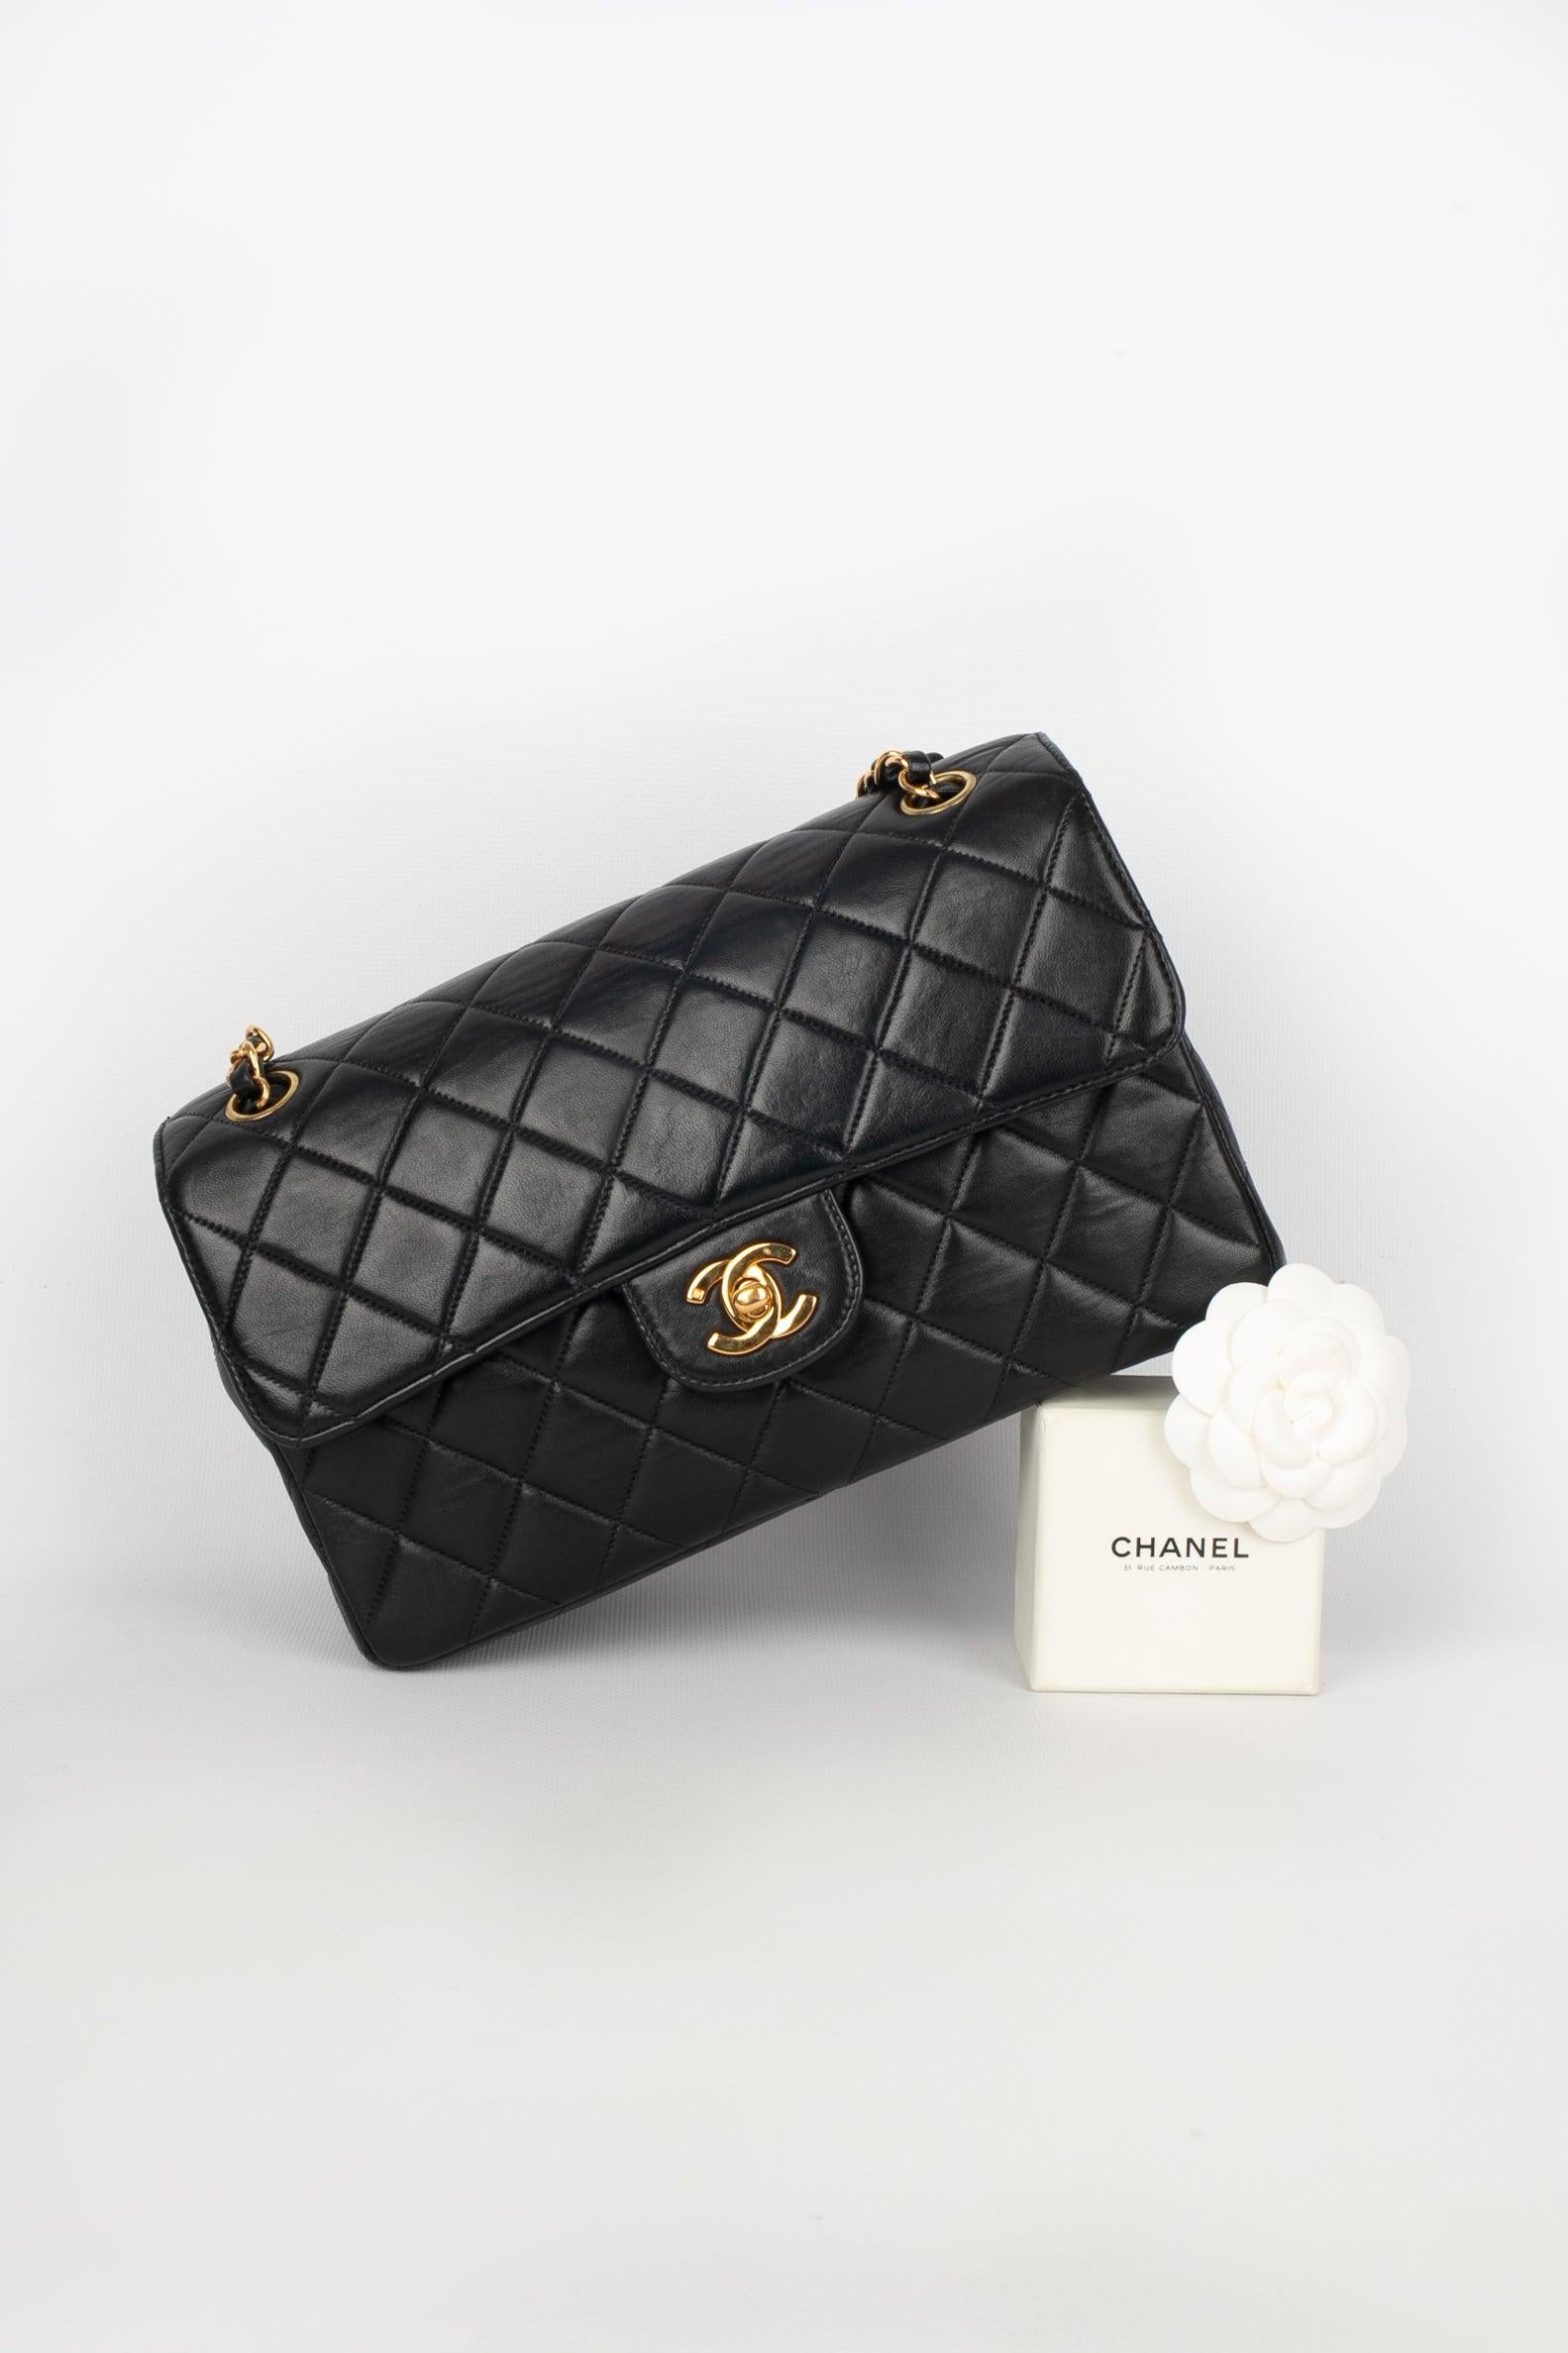 Chanel Timeless Quilted Black Leather Bag, 1996/1997 For Sale 7